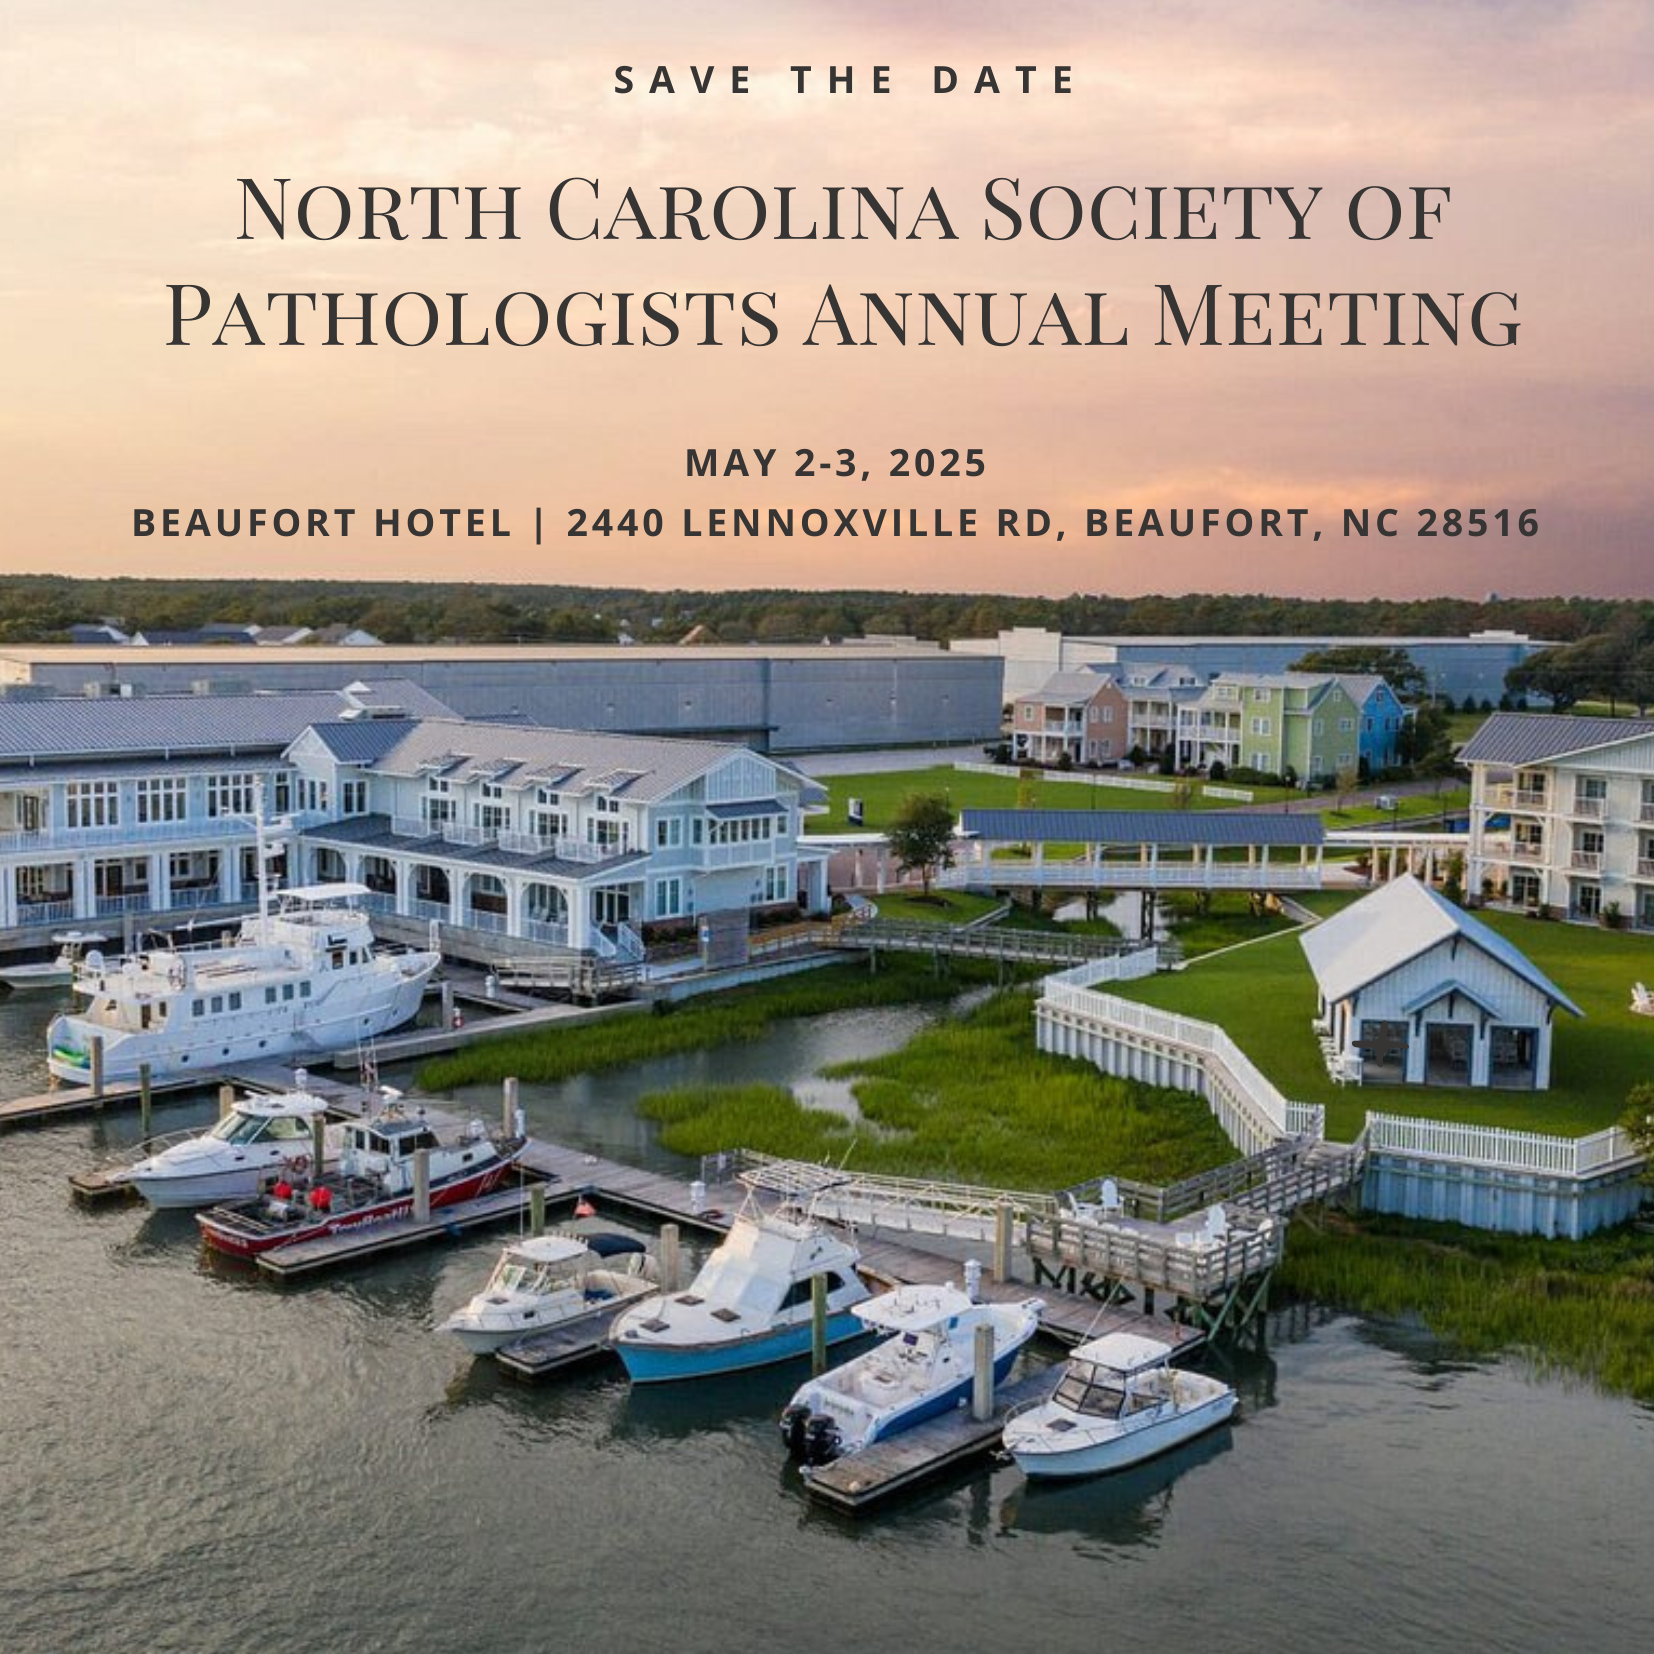 Join us at the Beaufort Hotel for the 2025 NCSP Annual Meeting, May 2-3